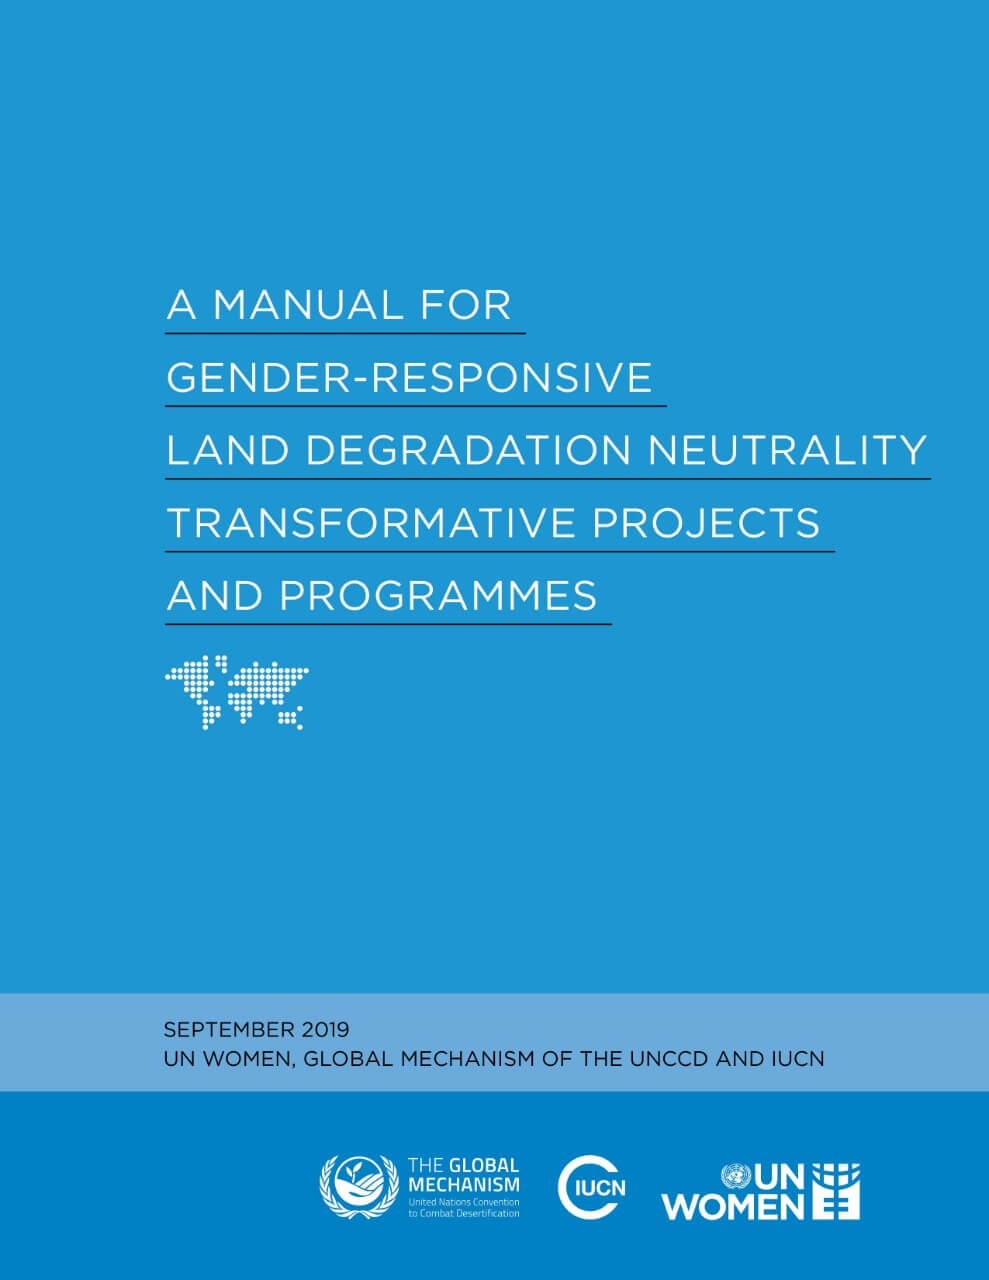 A manual for gender-responsive land degradation neutrality transformative projects and programmes